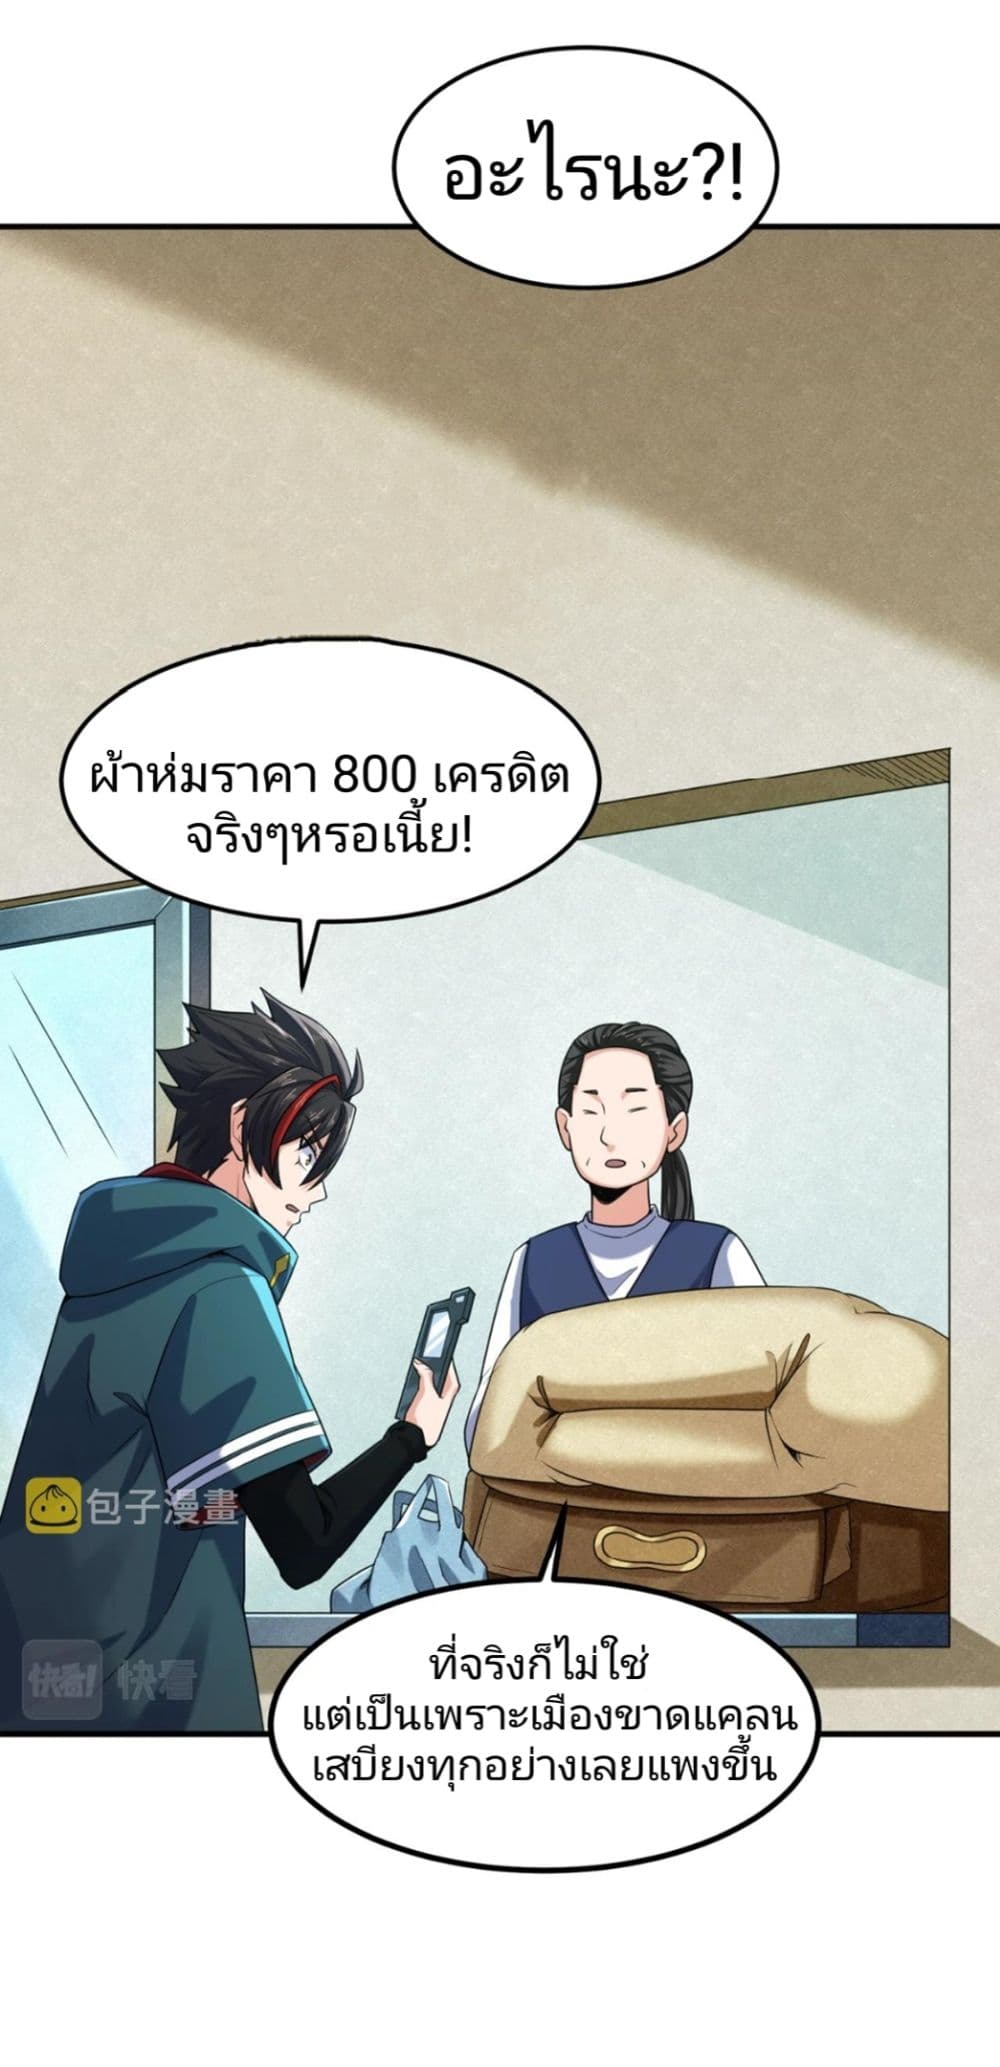 The Age of Ghost Spirits à¸à¸­à¸à¸à¸µà¹ 6 (6)